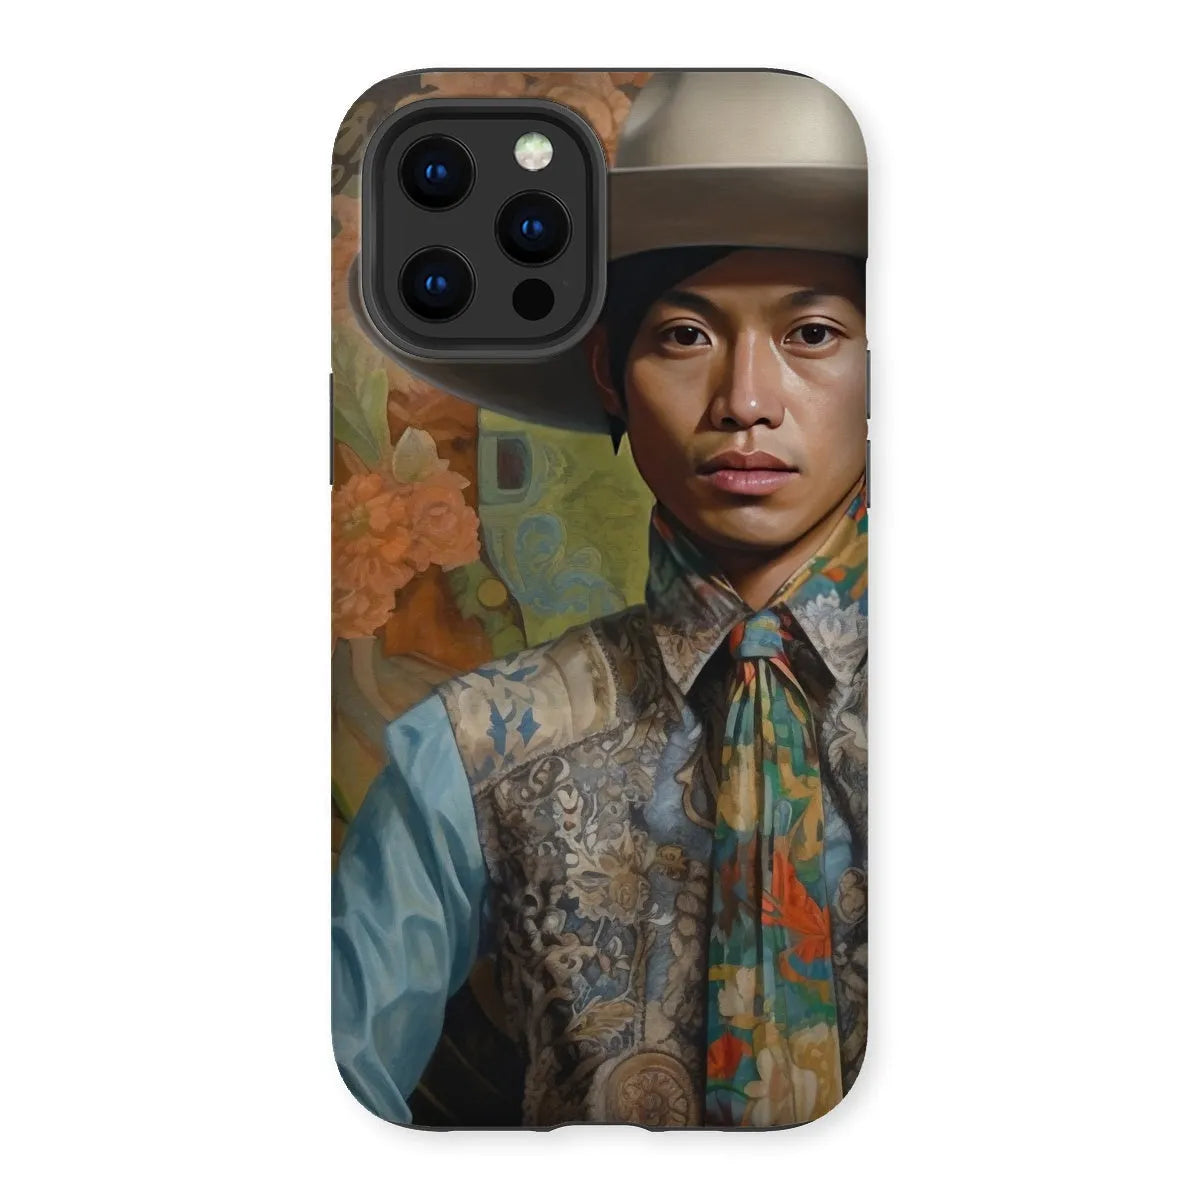 Junada The Gay Cowboy - Dandy Gay Aesthetic Art Phone Case - Iphone 12 Pro Max / Matte - Mobile Phone Cases - Aesthetic